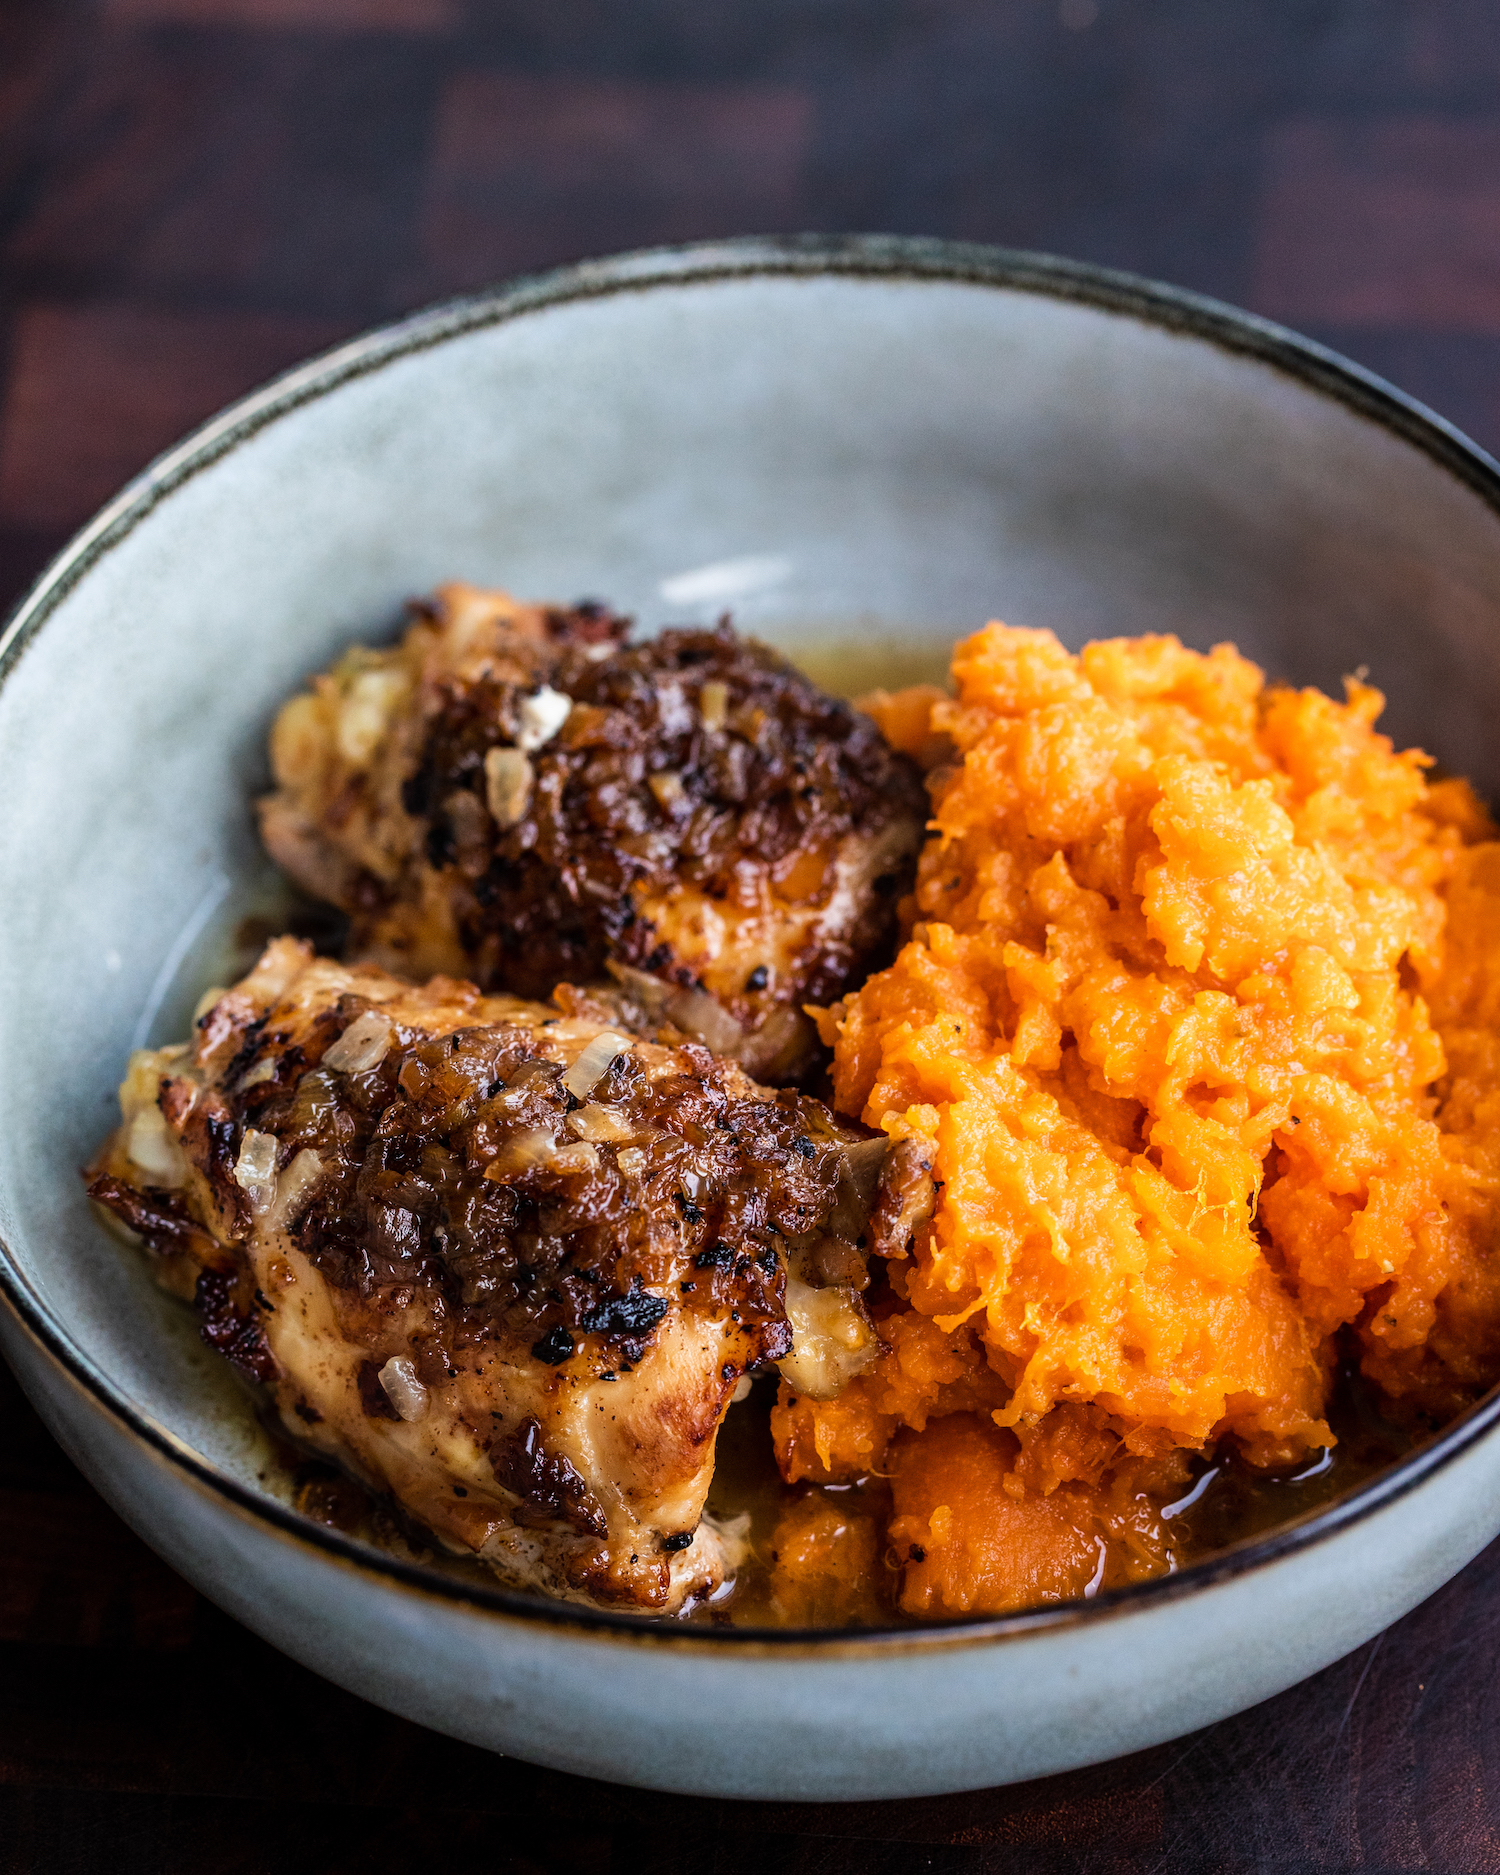 Slow cooked lemon chicken thighs with balsamic onions and sweet potato mash in a grey blue bowl on a wooden chopping board